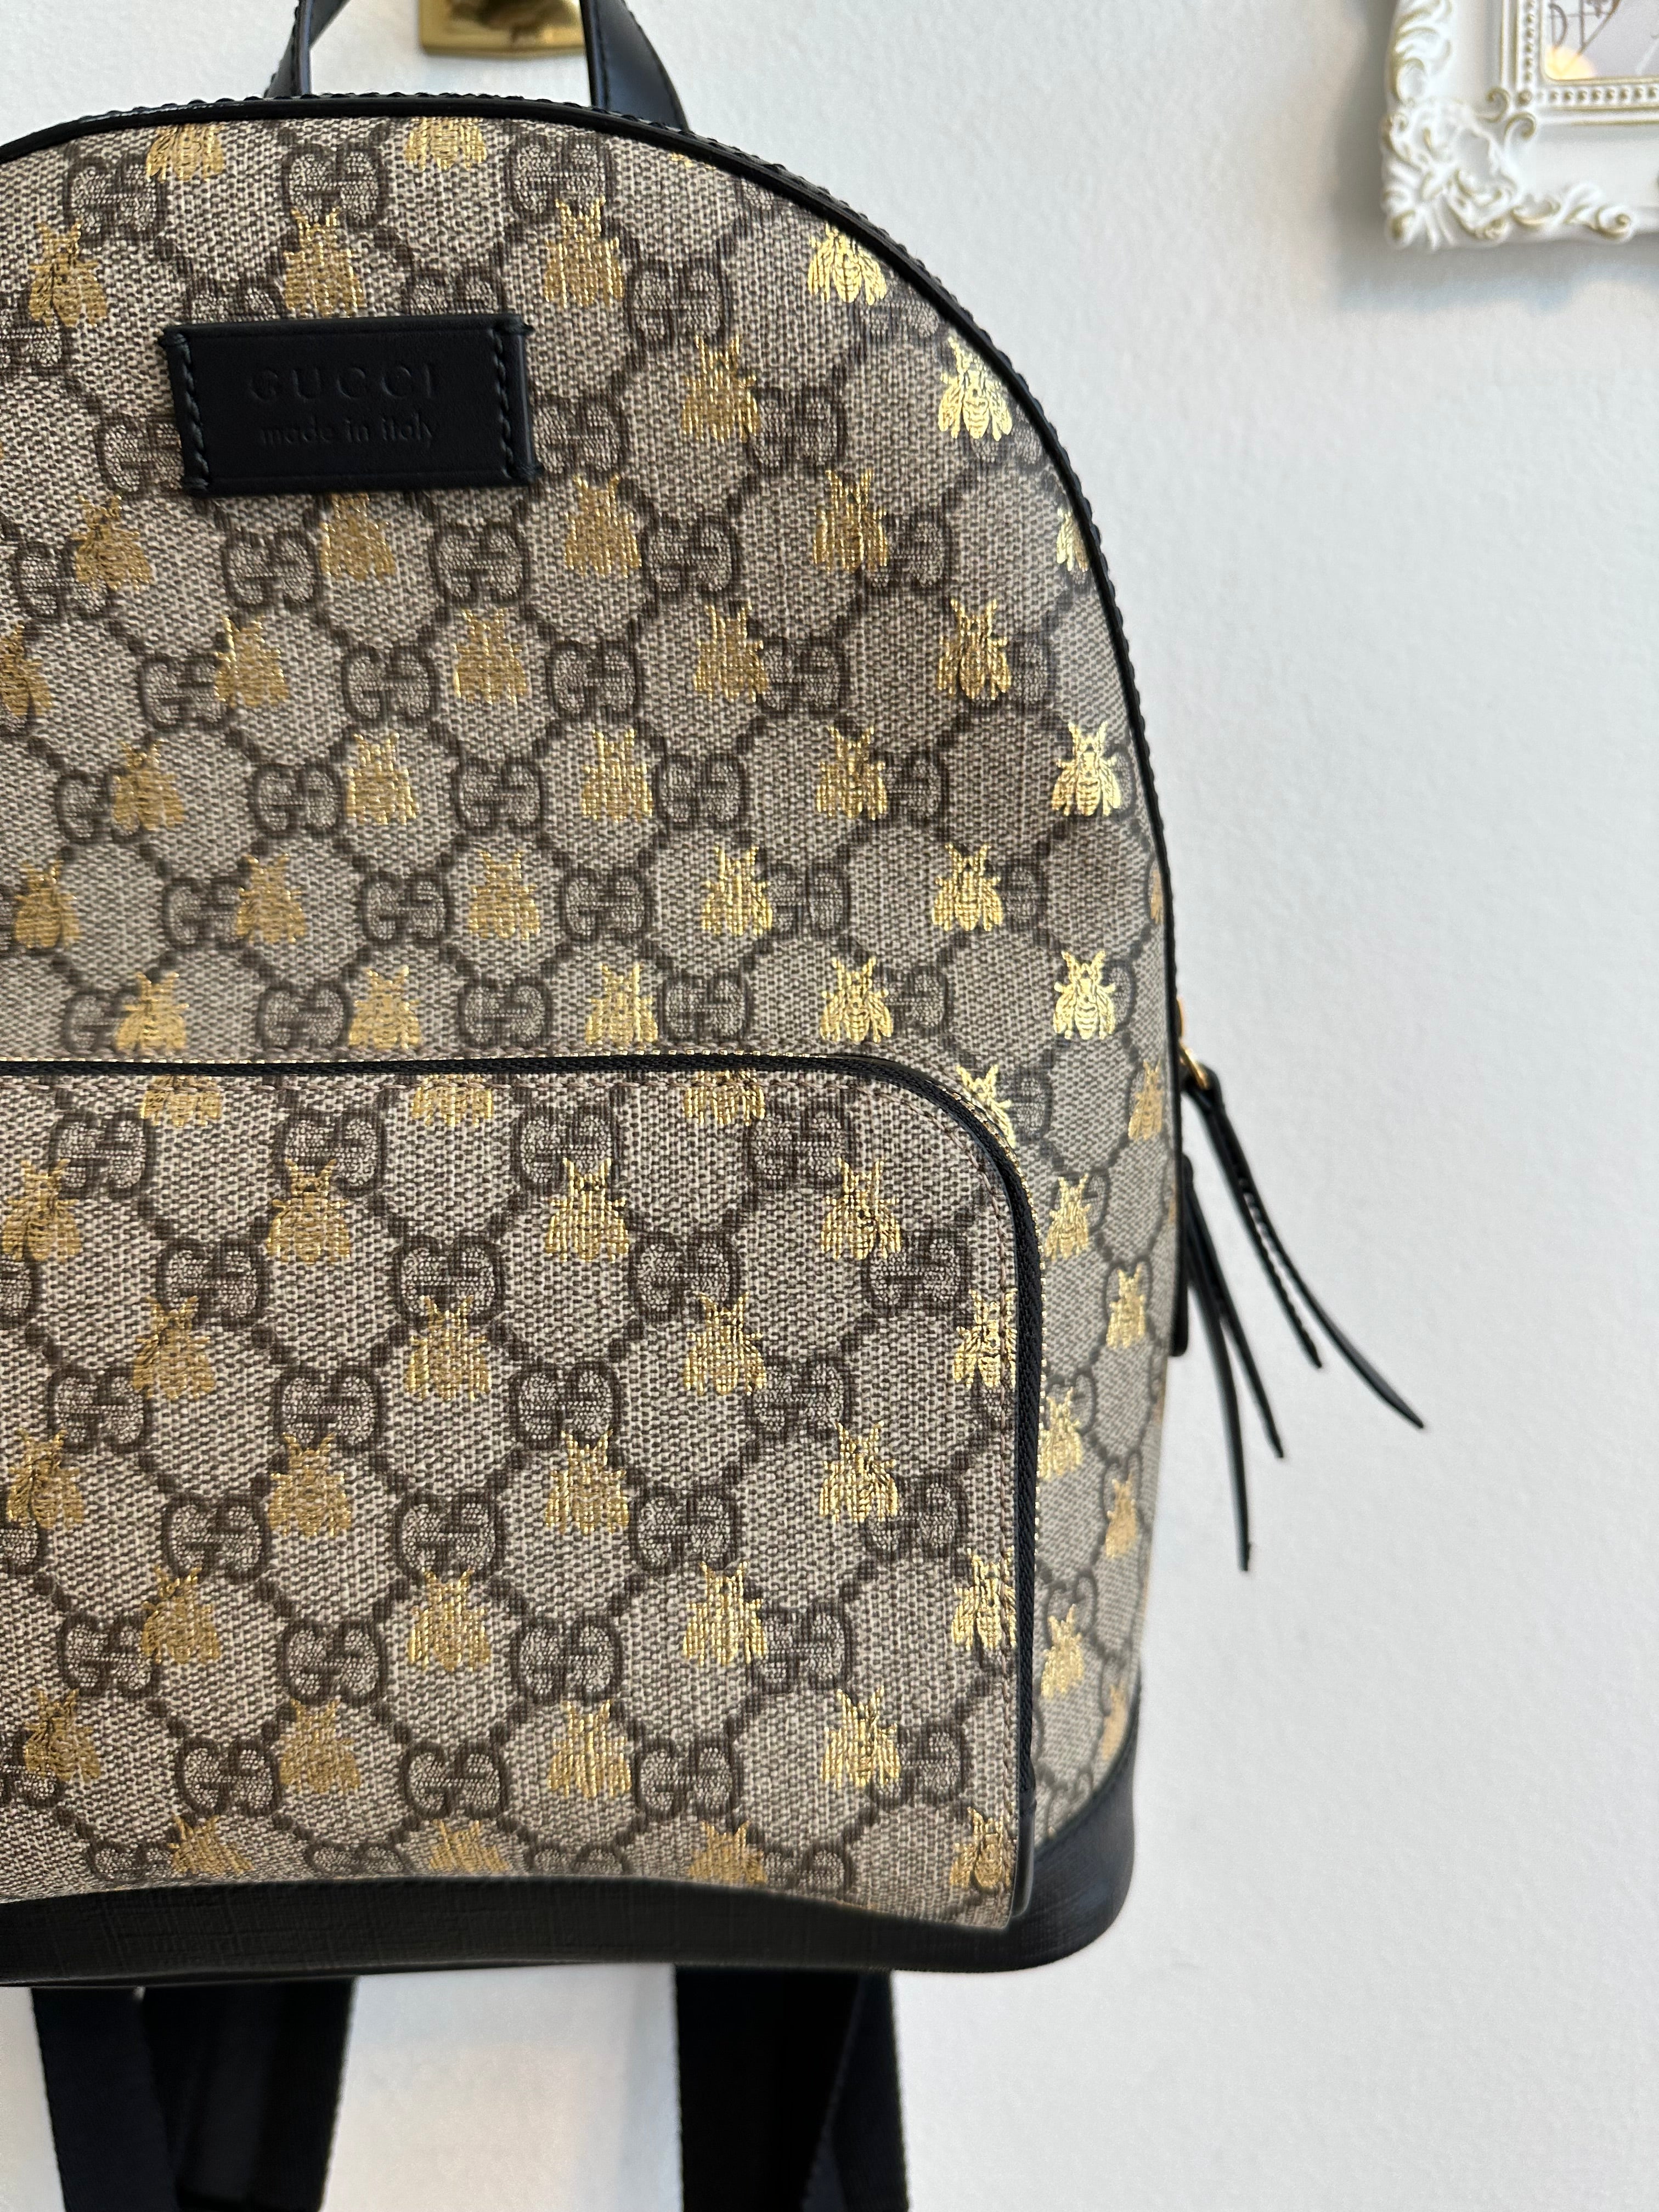 Pre-Owned GUCCI GG Supreme Bees Backpack